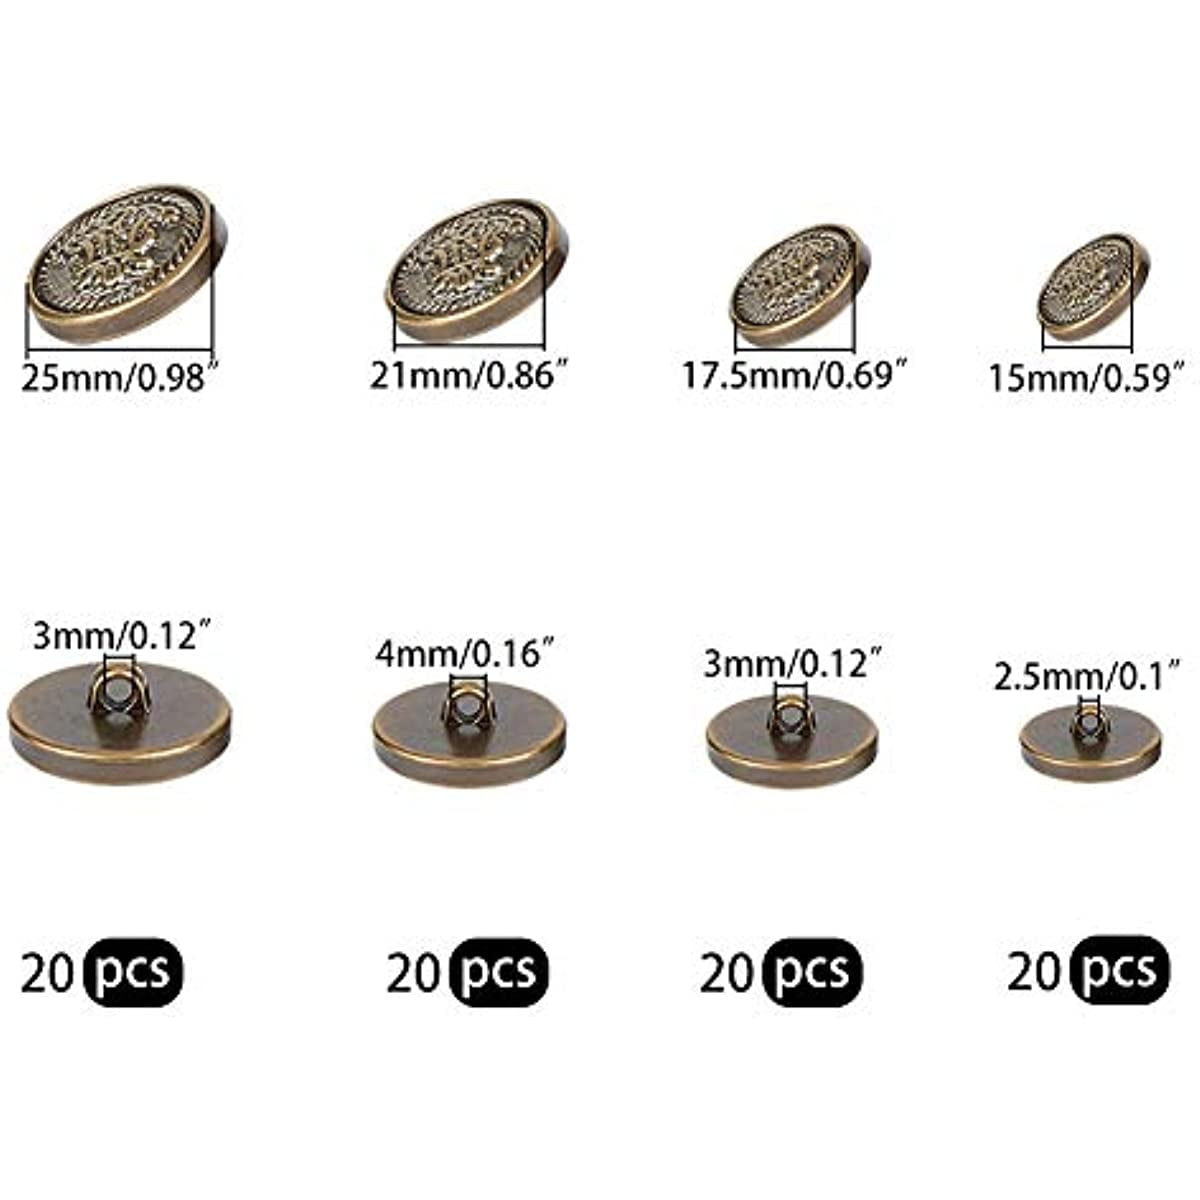 14 Pcs Metal Blazer Button Set,Gold Buttons for Blazer,18 mm and 23mm  No-Sew Removable Metal Buttons,Women and Men's Jeans Clothing Supplies,for